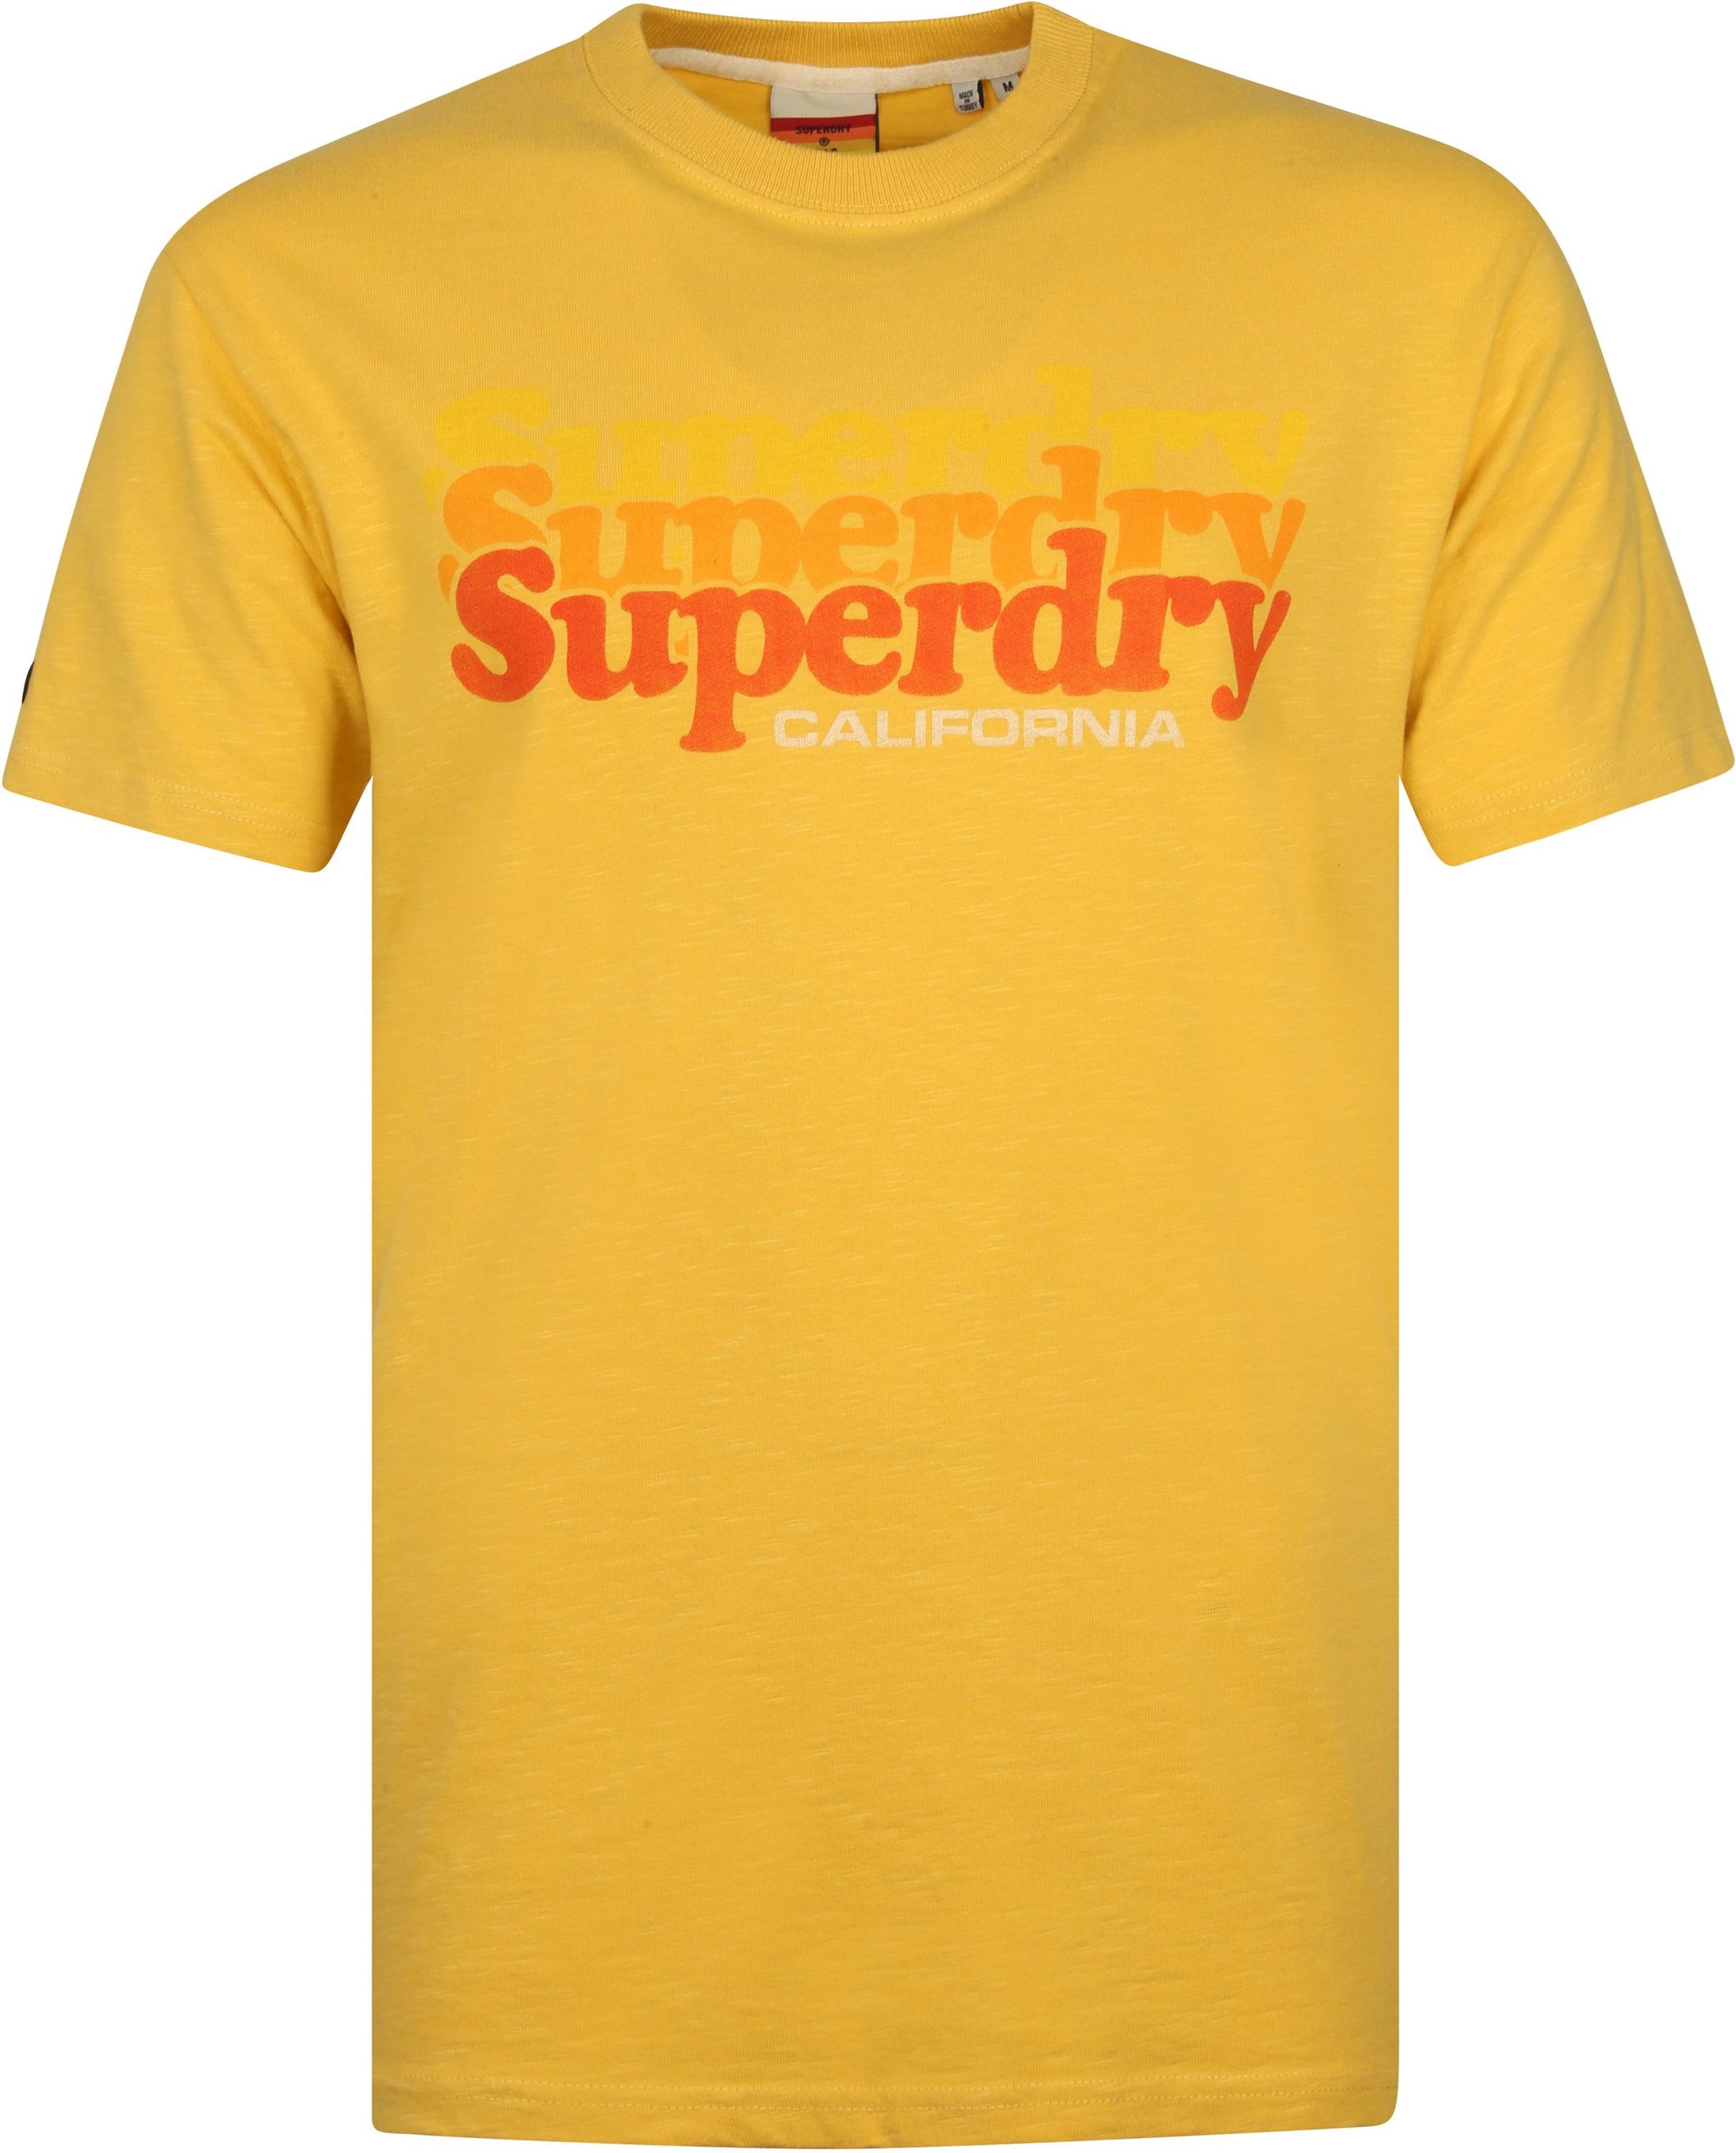 Superdry Classic T Shirt Logo Yellow size L